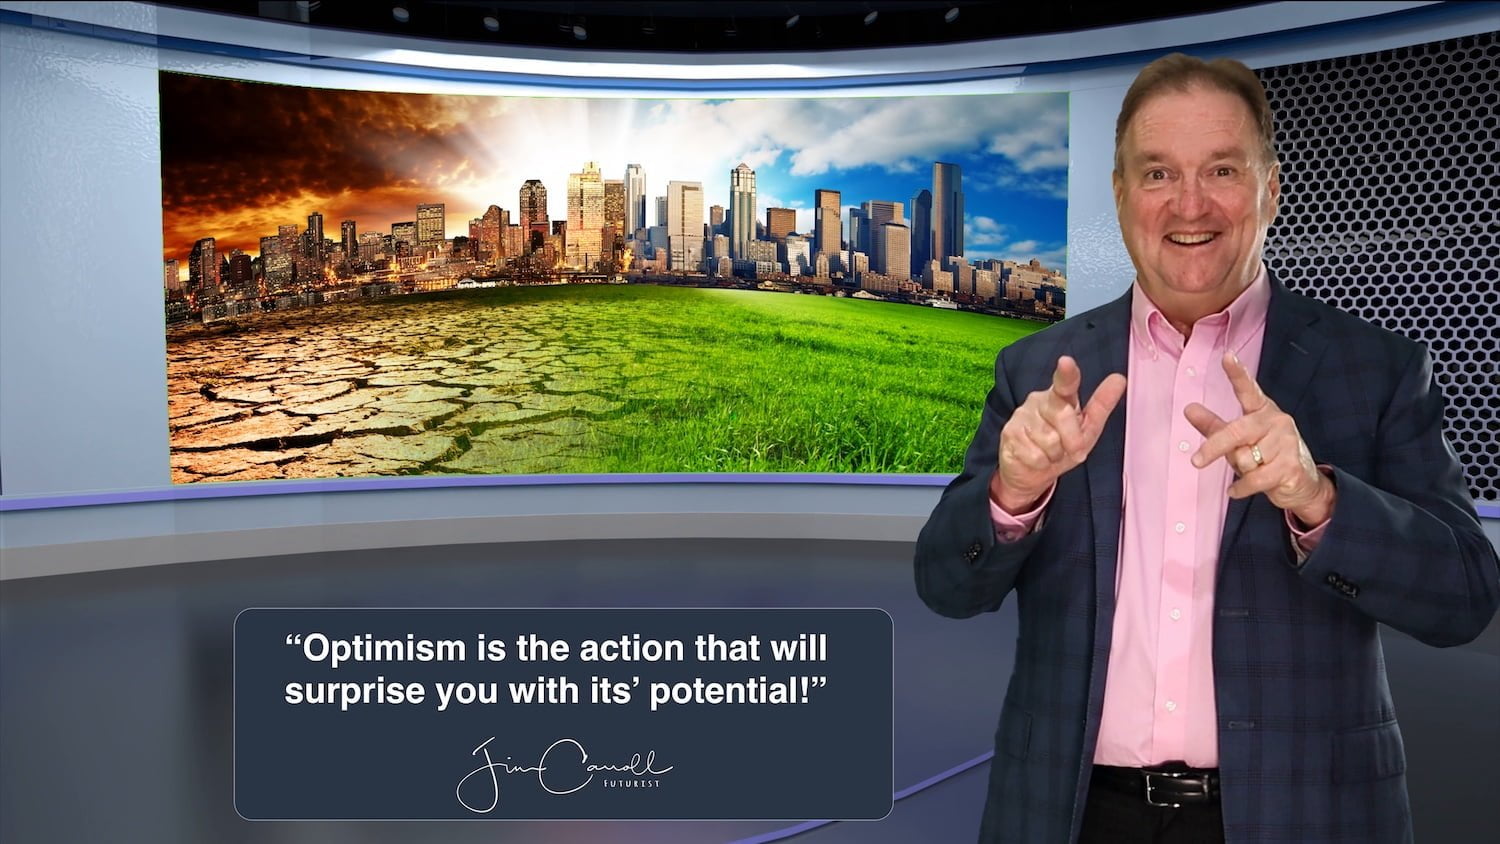 Daily Inspiration: “Optimism is the action that will surprise you with its’ potential!”